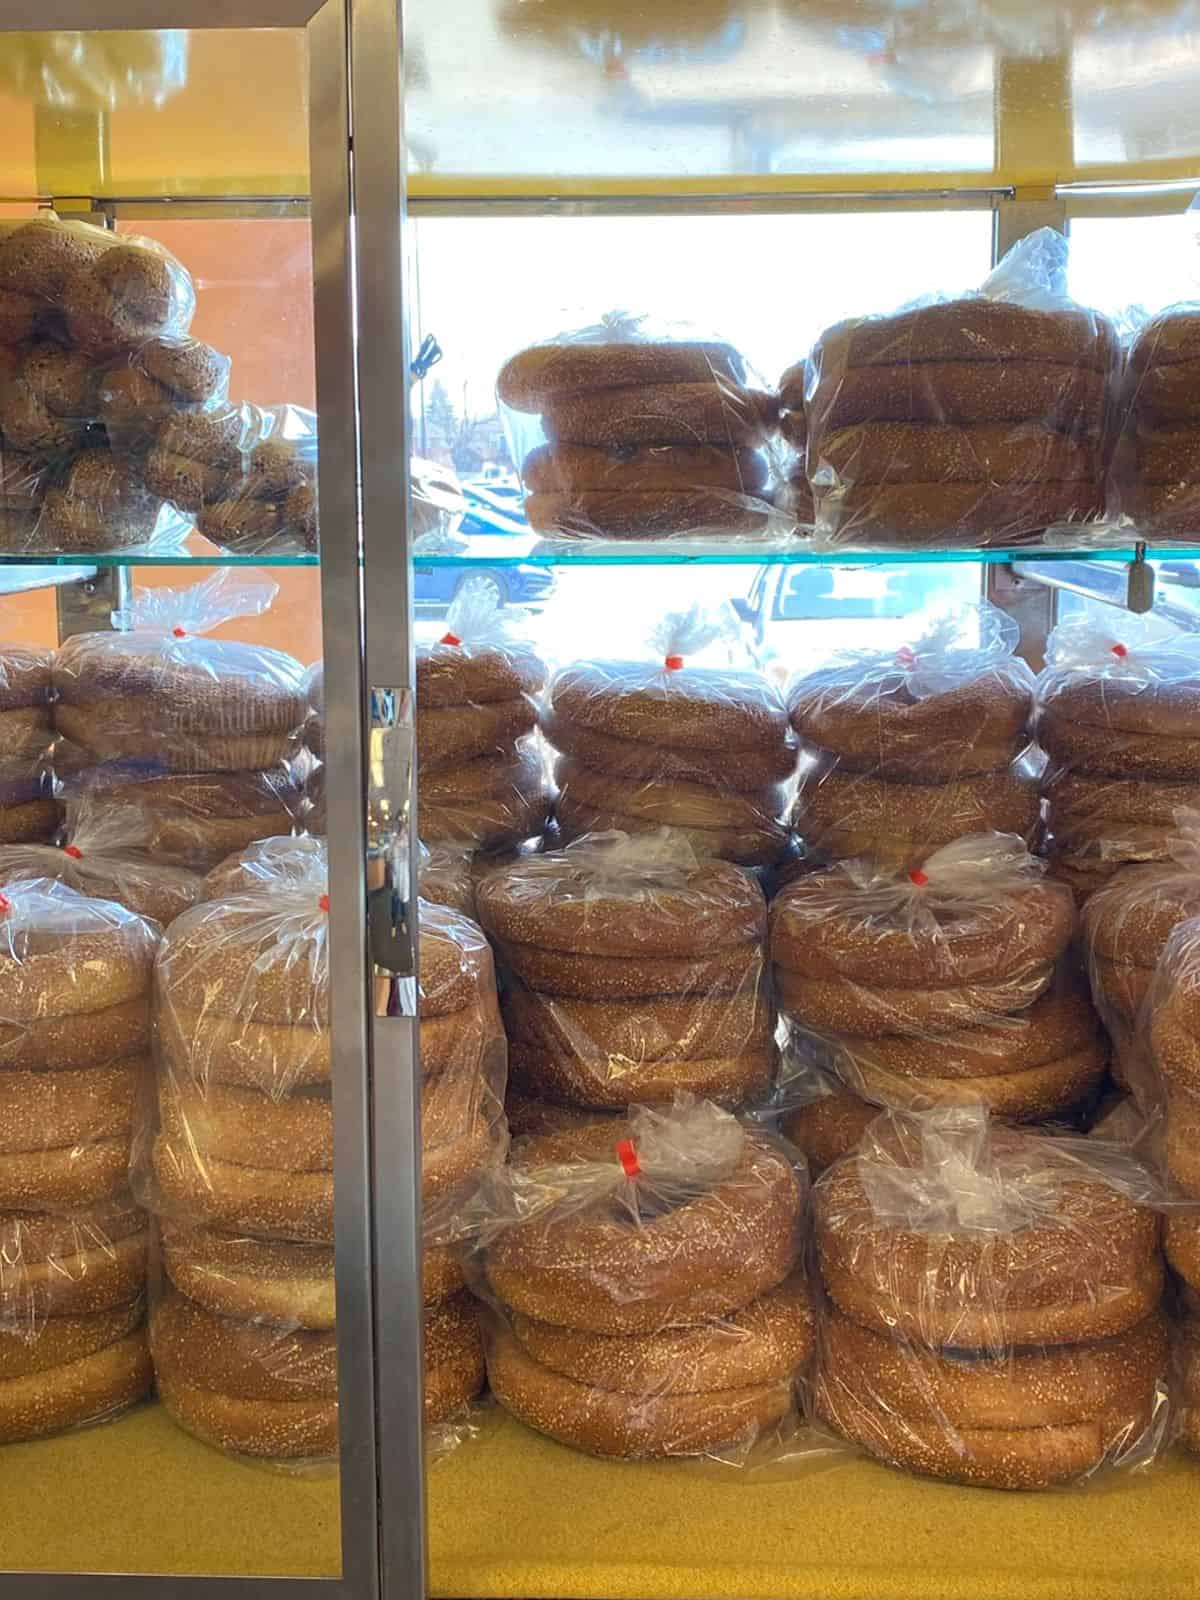 A close up image of bags of simit bread.